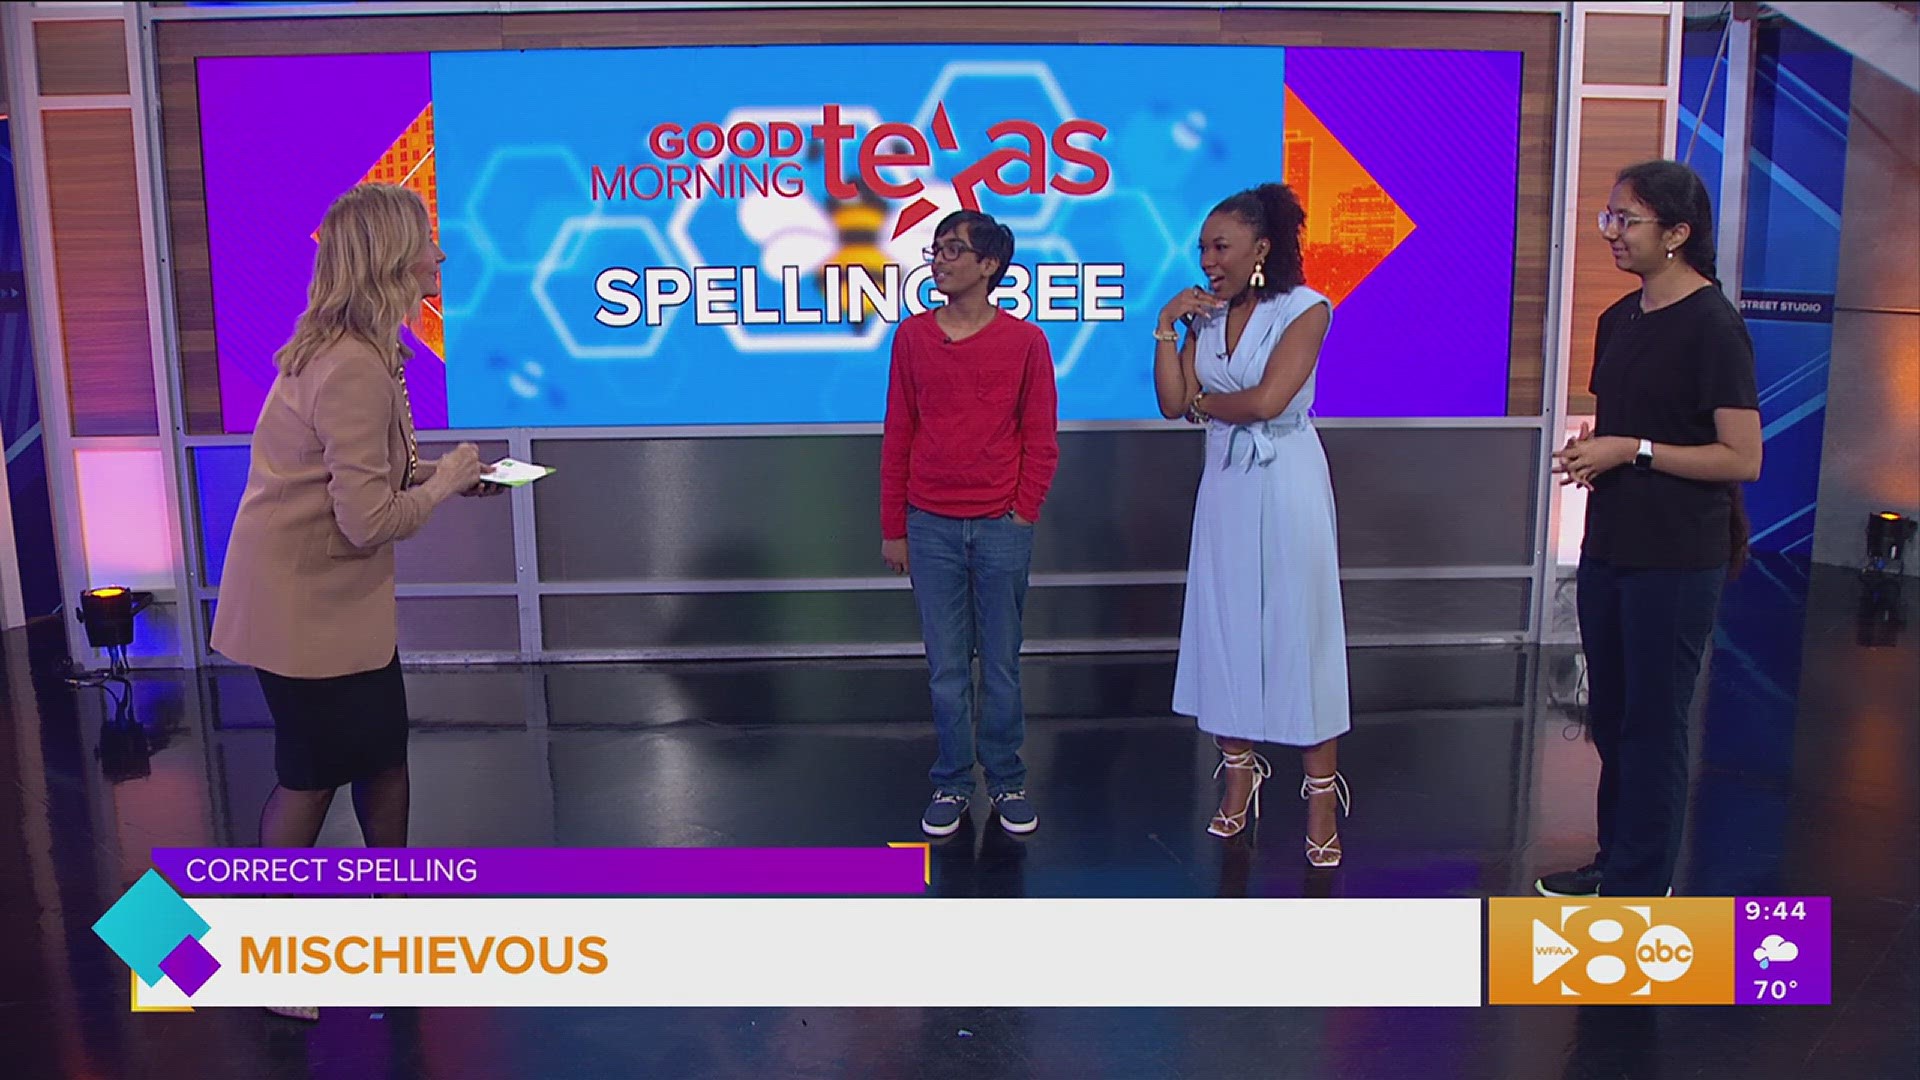 Dallas Regional Spelling Bee Winners Faizan Zaki and Sryia Gomatam join us ahead of their appearance at the Scripps National Spelling Bee in Washington D.C.